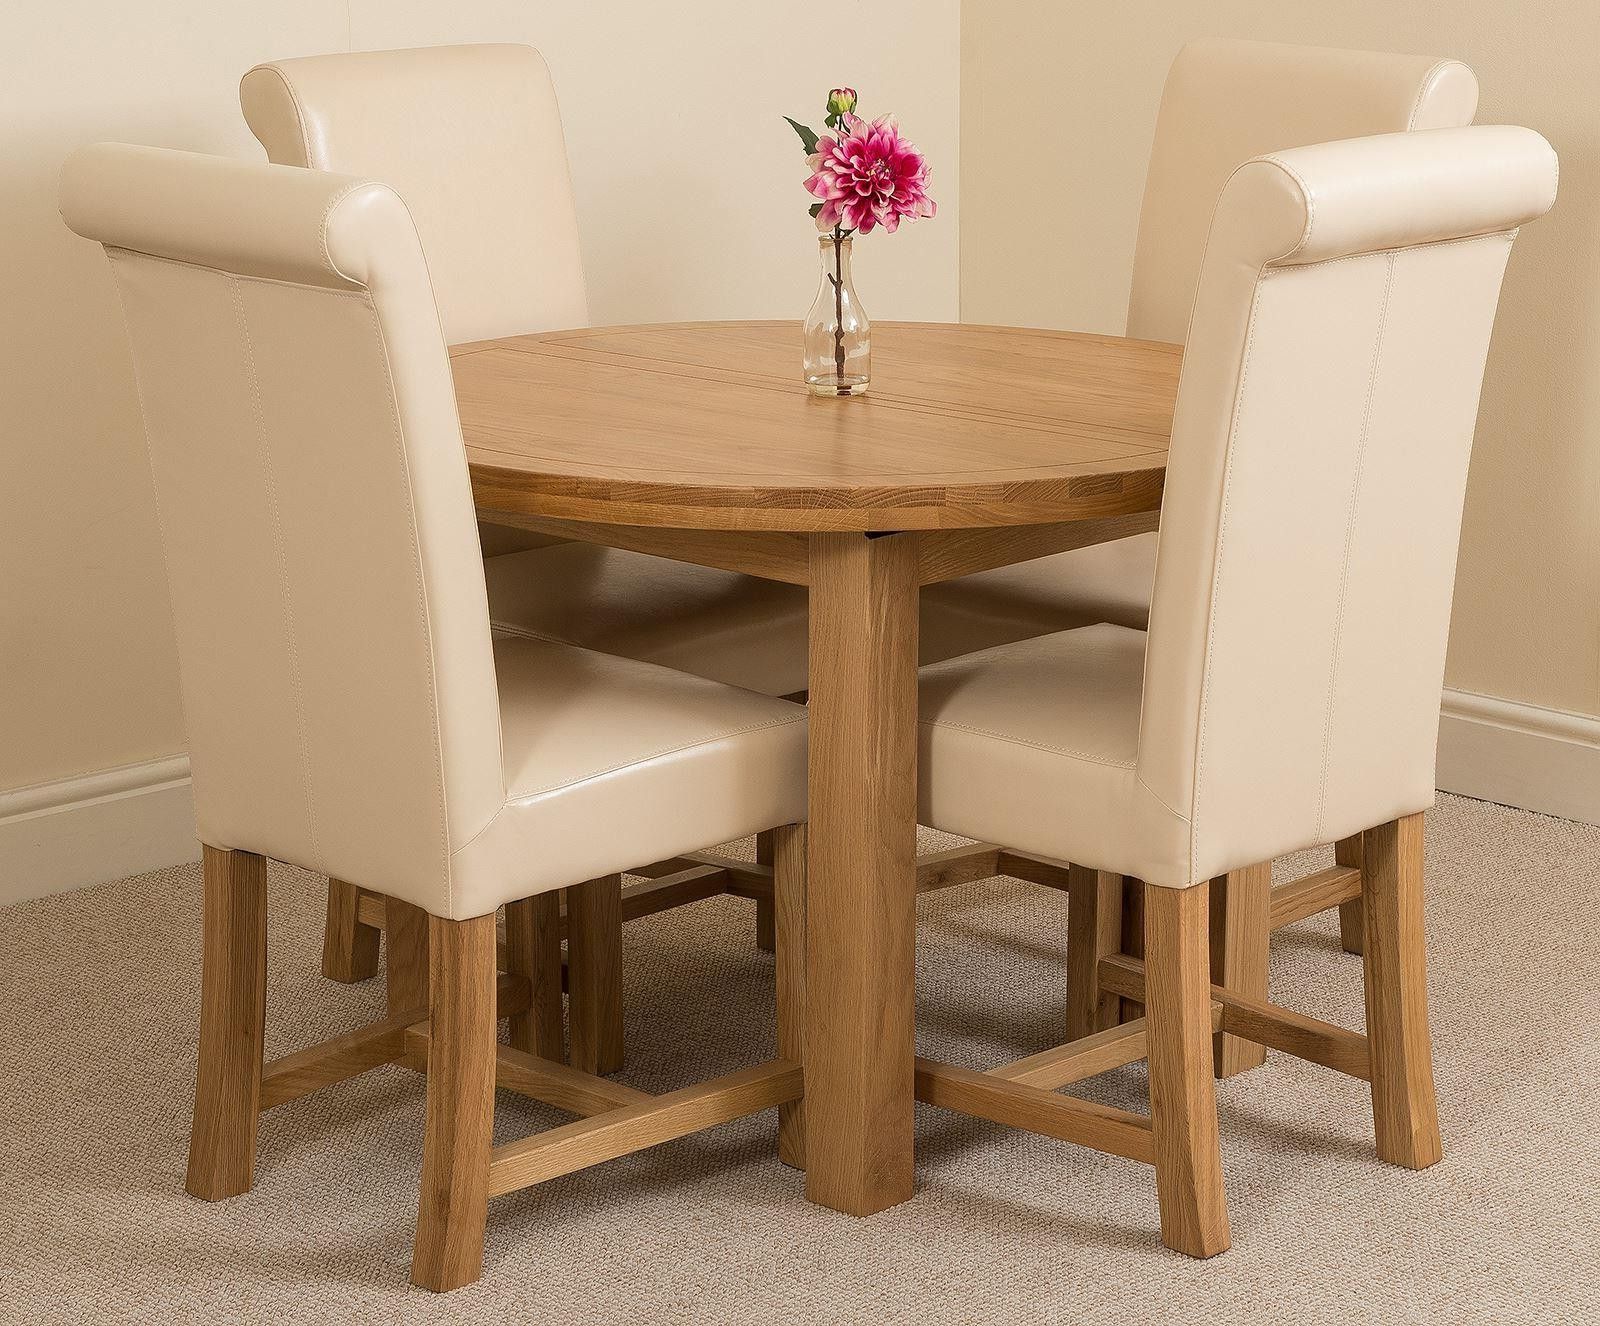 Preferred Edmonton Solid Oak Extending Oval Dining Table With 4 Washington Dining Regarding Extendable Oval Dining Sets (View 1 of 15)